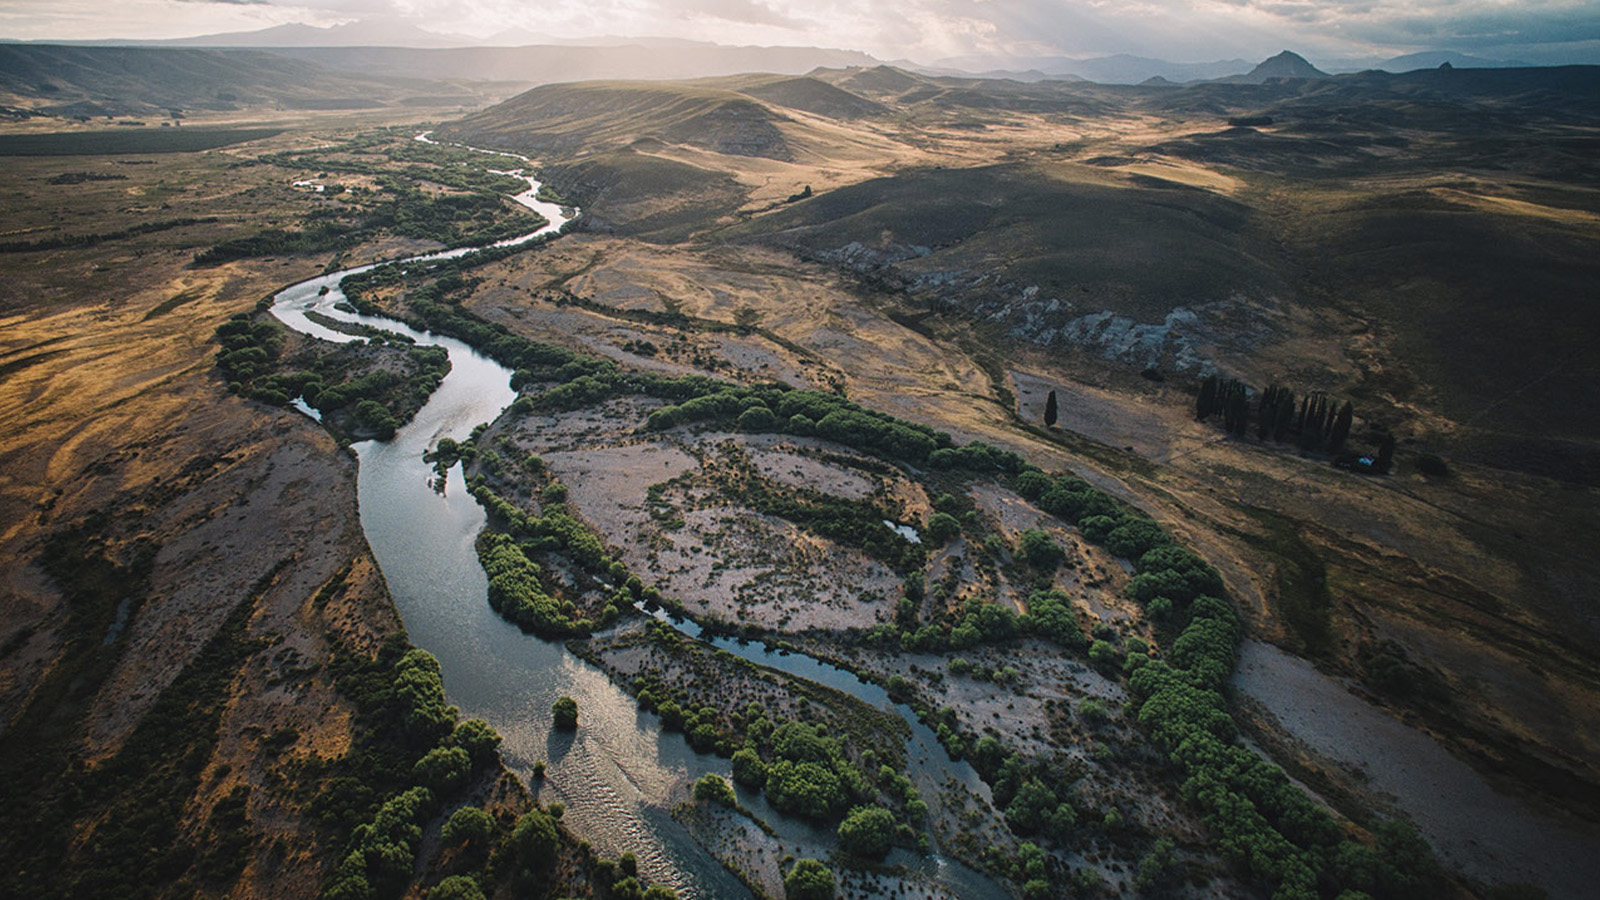 YETI travels the world to find its stories. Like Chimehuin River, Patagonia (image courtesy of Nick Kelley).